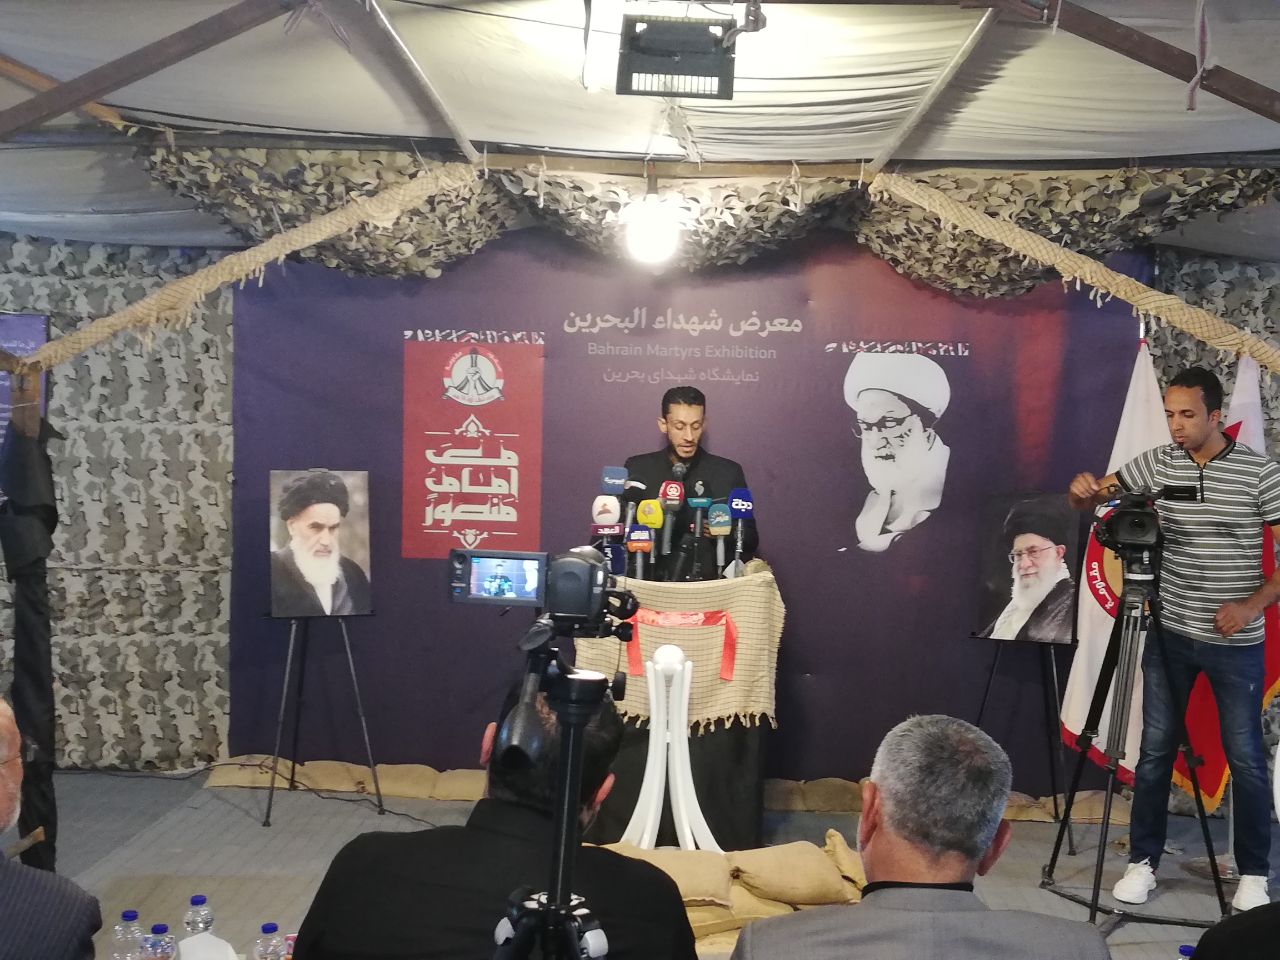 February 14 Coalition: Bahrain Revolution will Continue, There is No Compromise on Pride